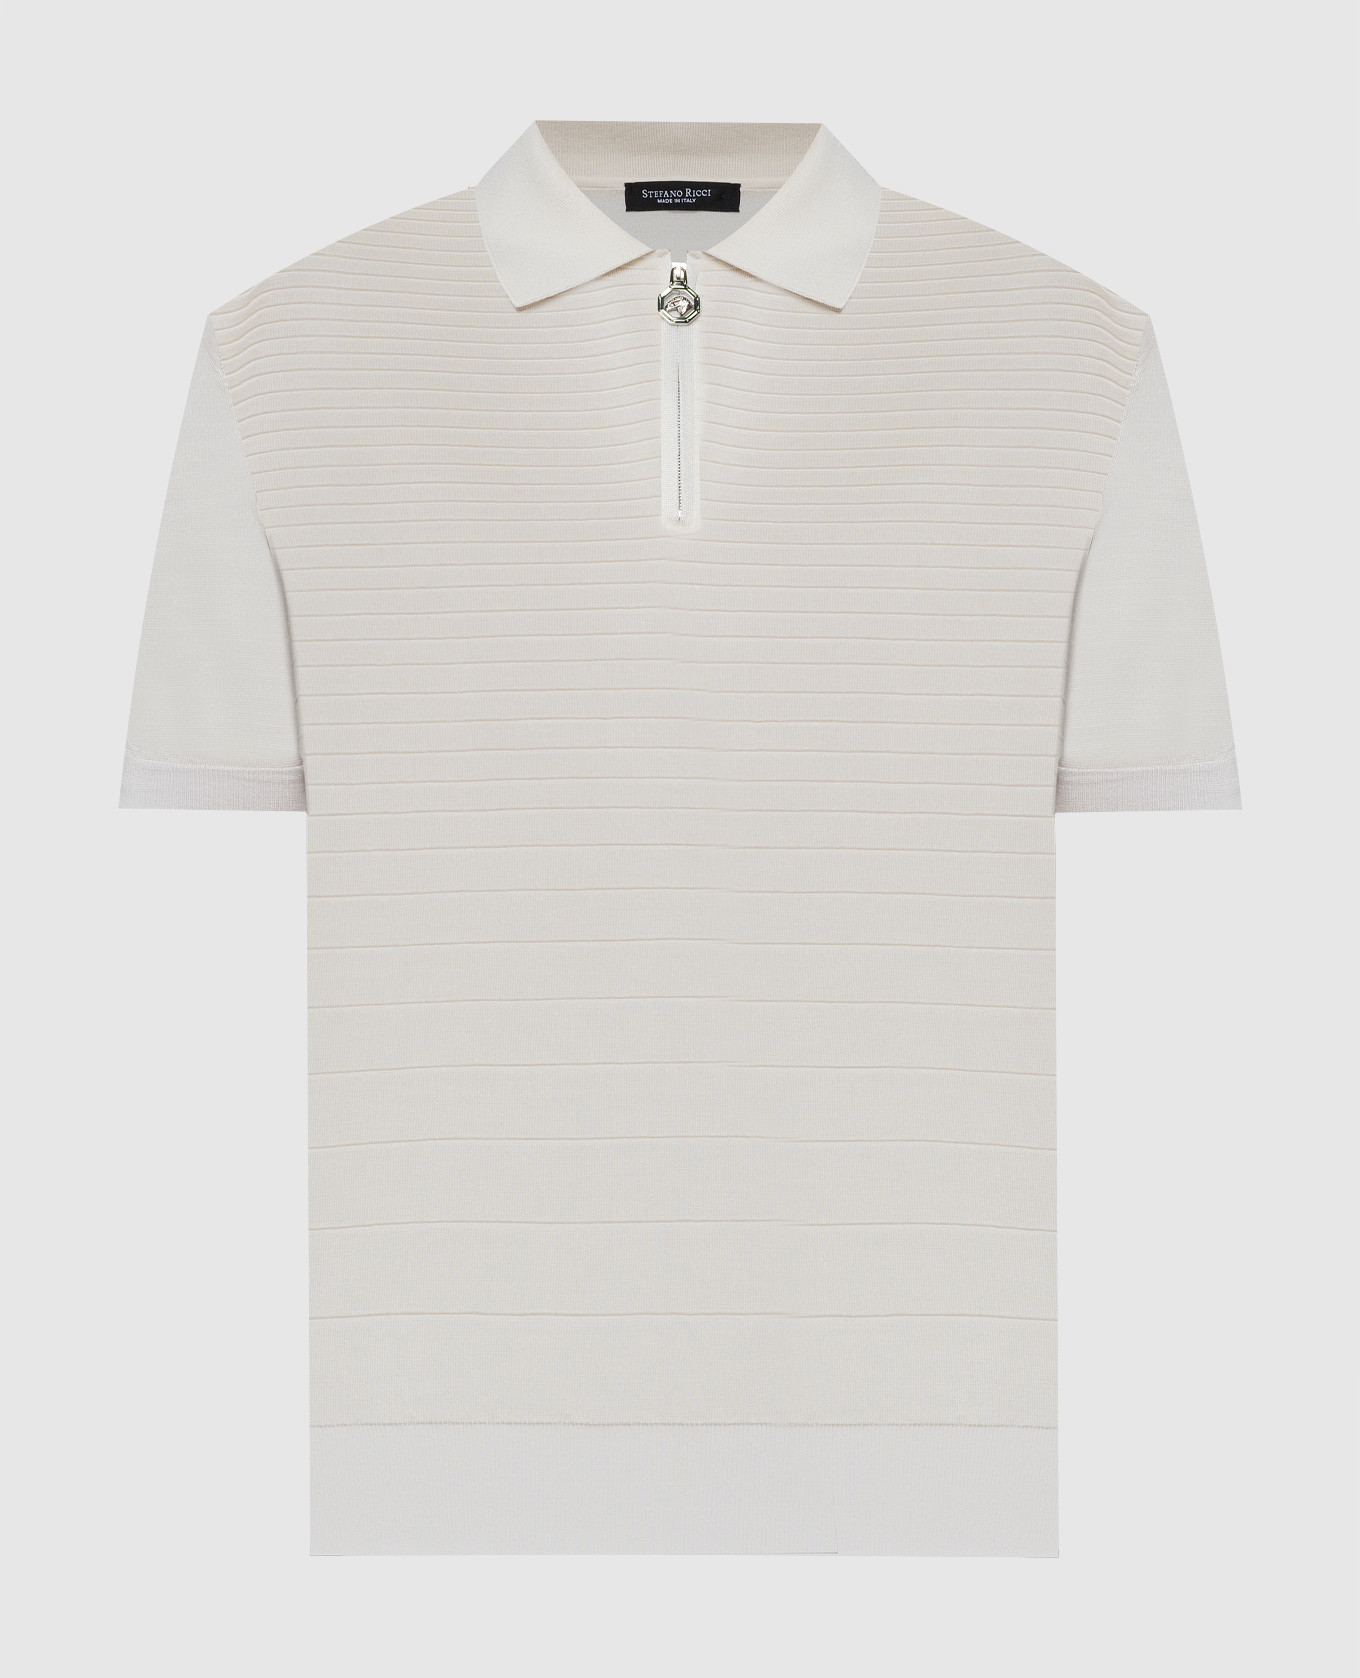 White polo shirt made of silk with a textured pattern